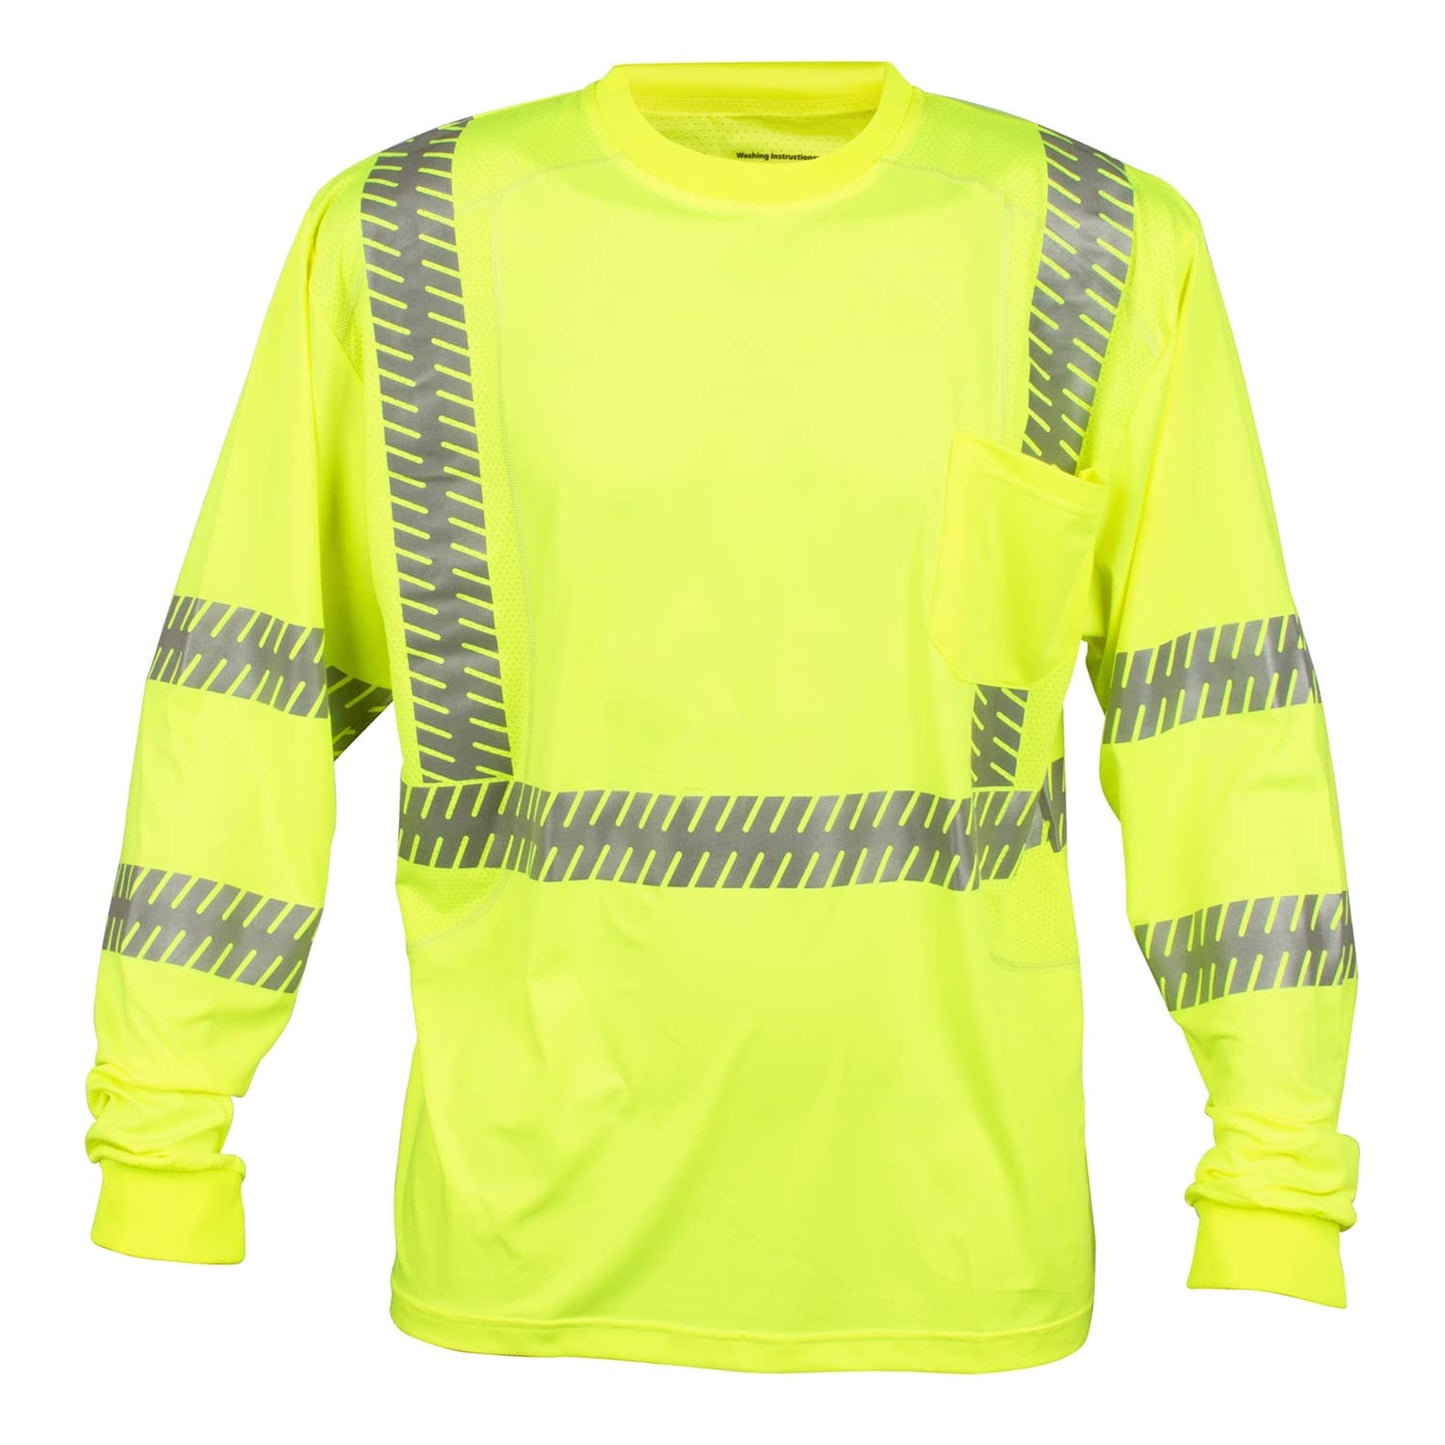 Type R, Class III, High-Visibility Comfort Stretch T-Shirt, Long Sleeves, Chest Pocket